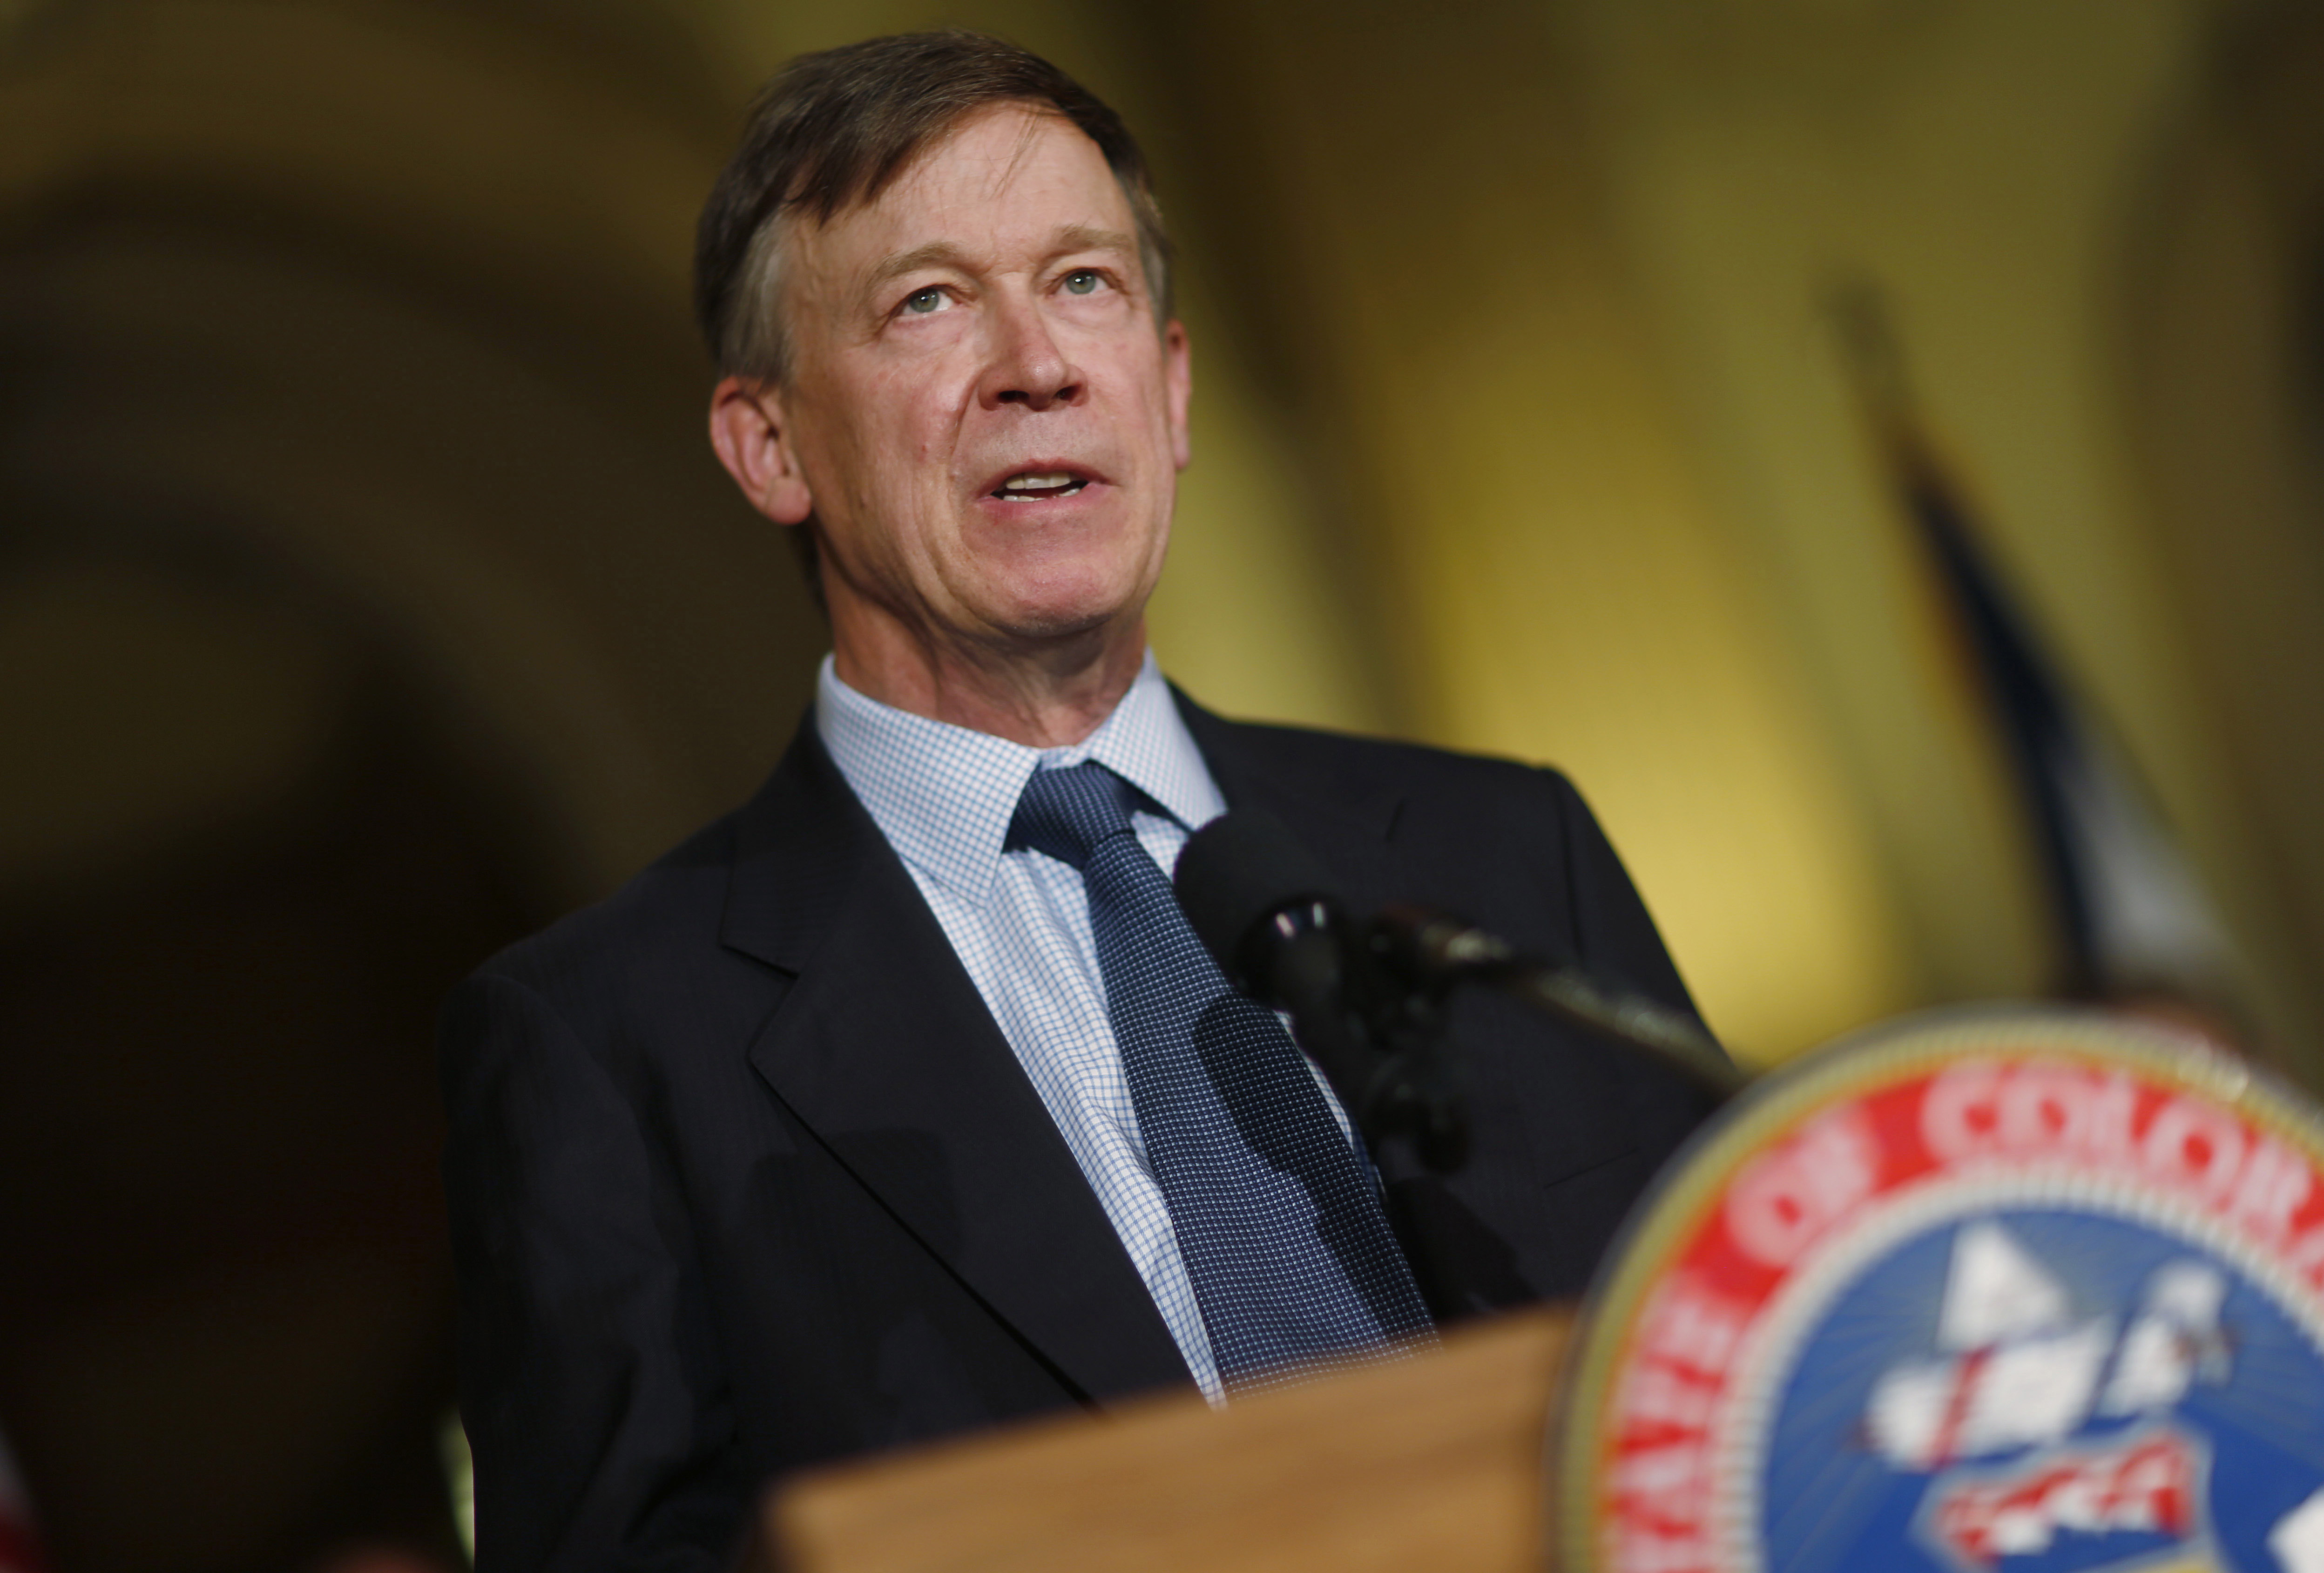 Amendment 66 defeat capped a year of challenges for Gov. Hickenlooper